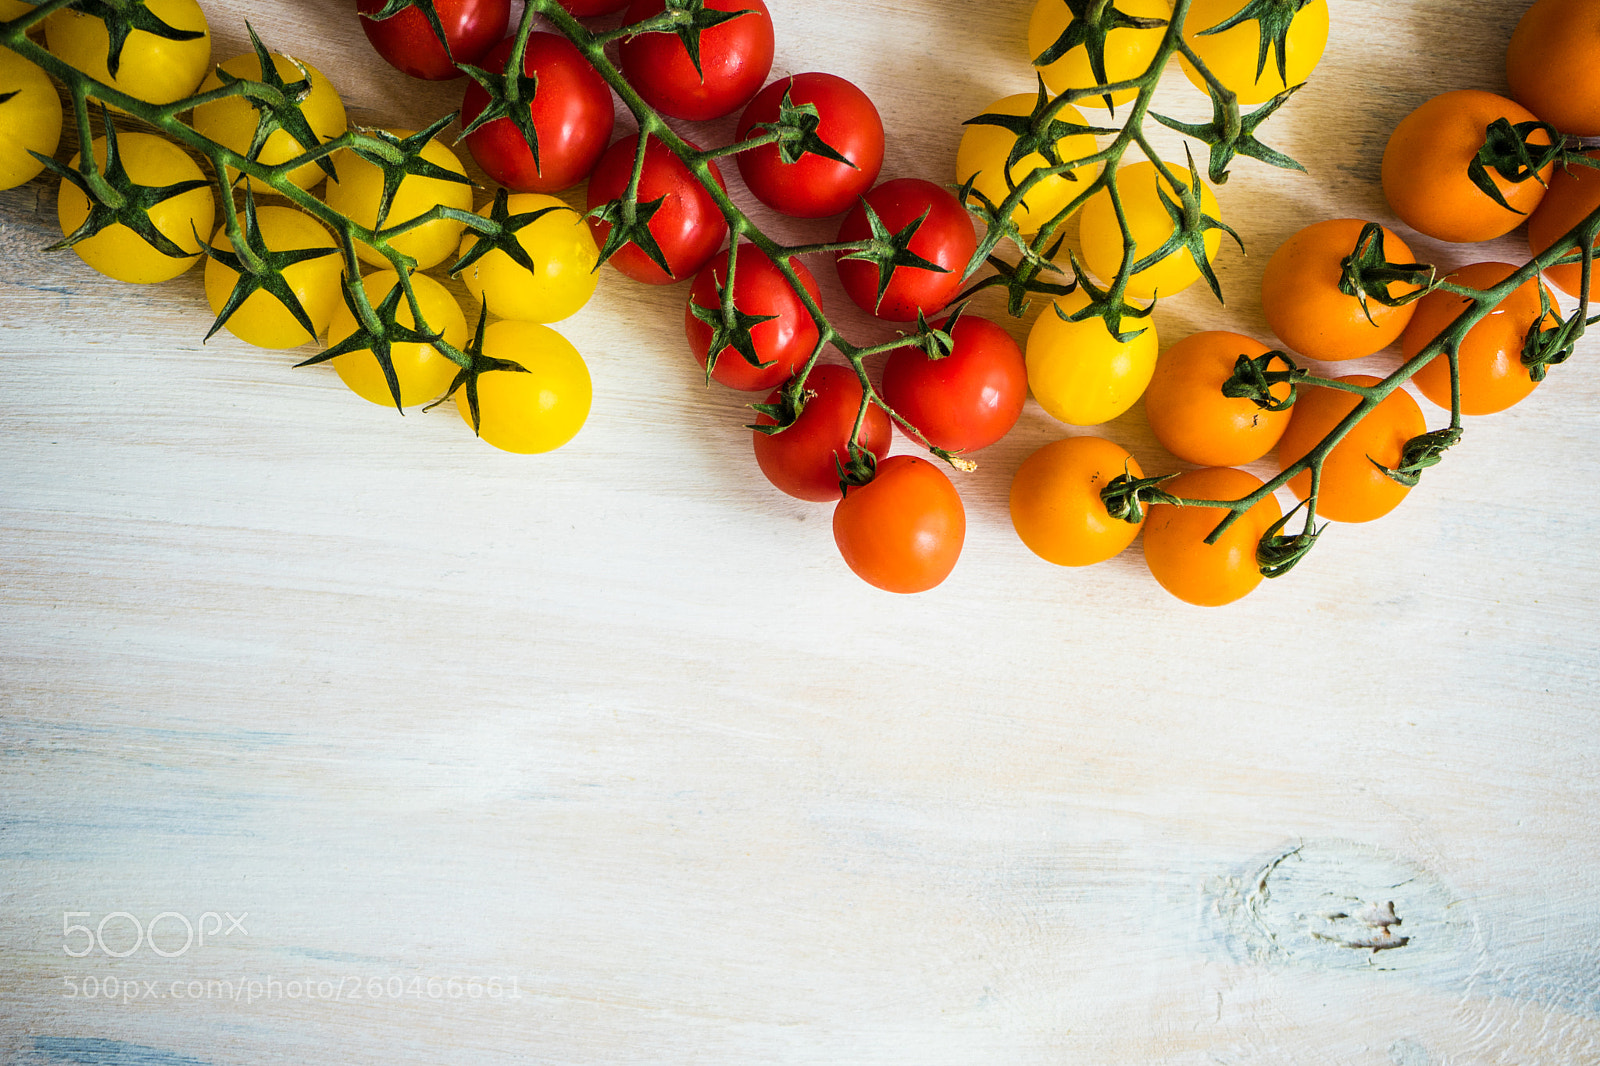 Sony a7 sample photo. Organic food concept photography